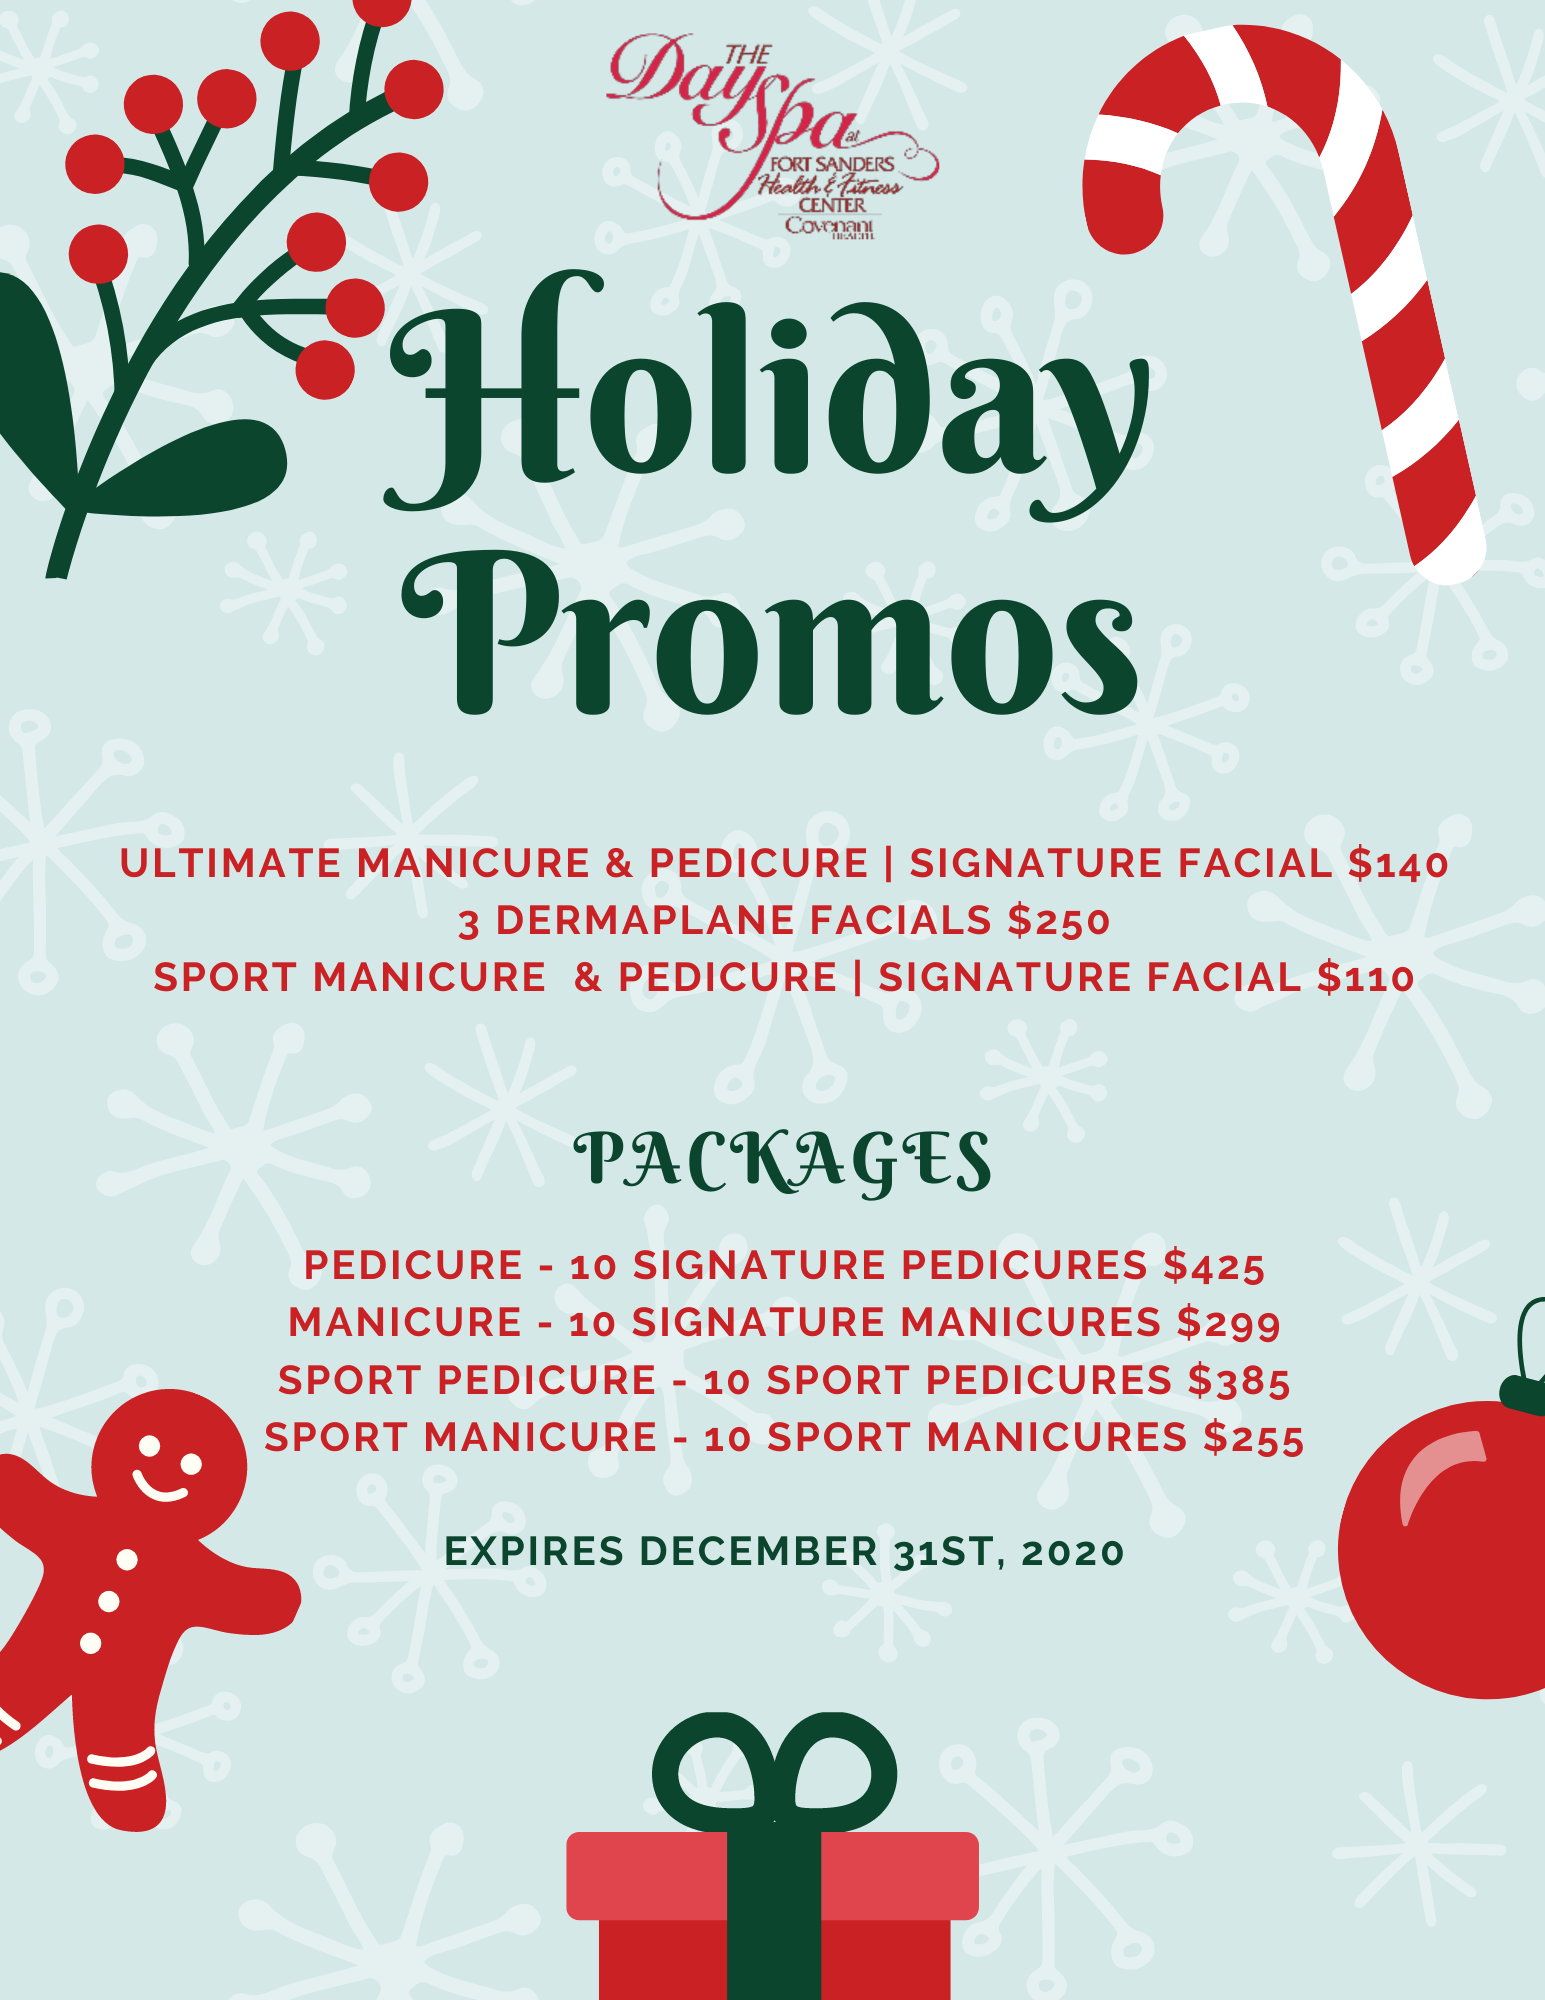 2020 Day Spa Holiday Promos Fort Sanders Health And Fitness Center